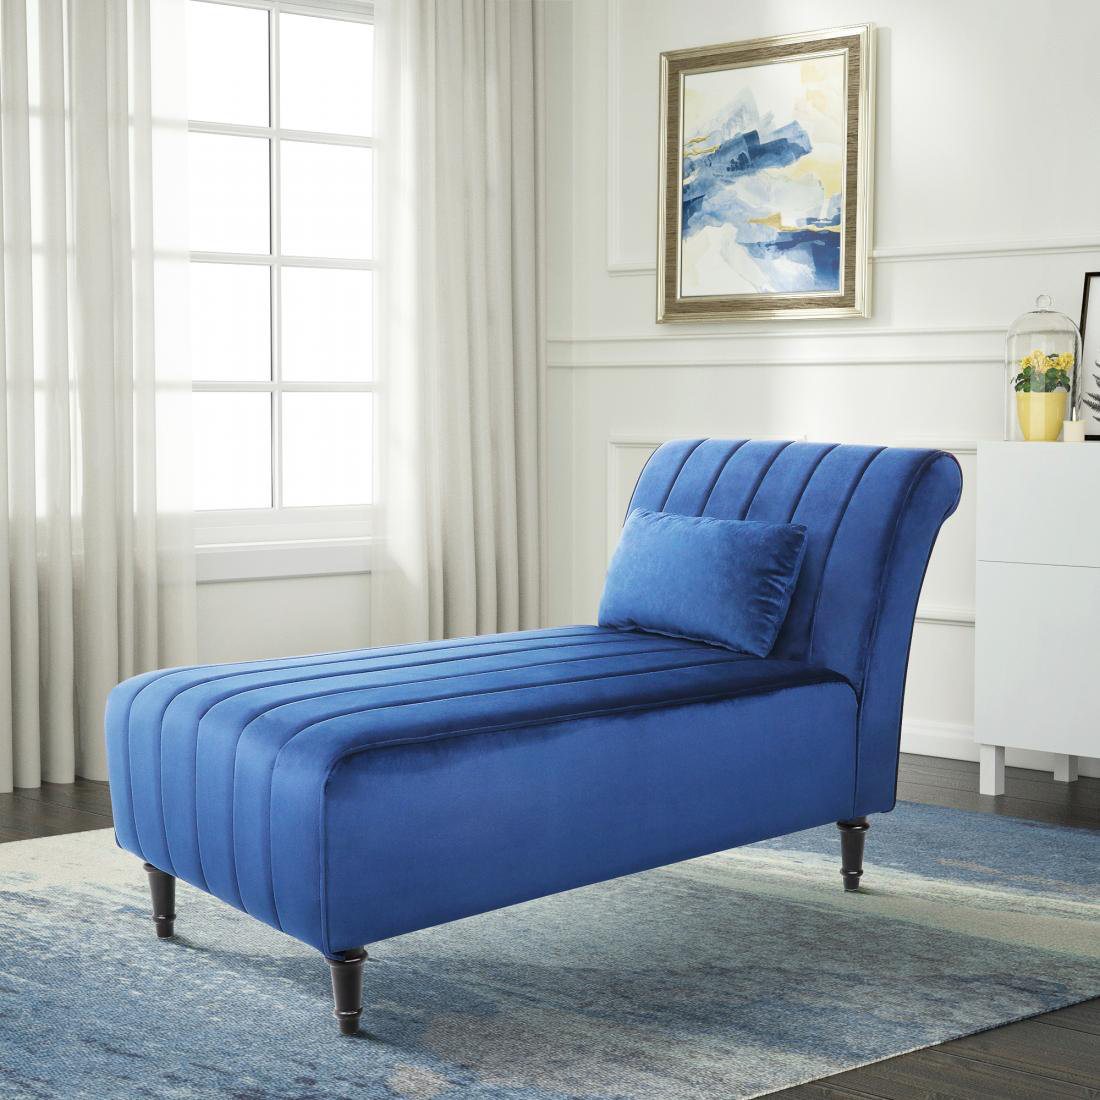 House of Hampton Annyah Upholstered Chaise Lounge